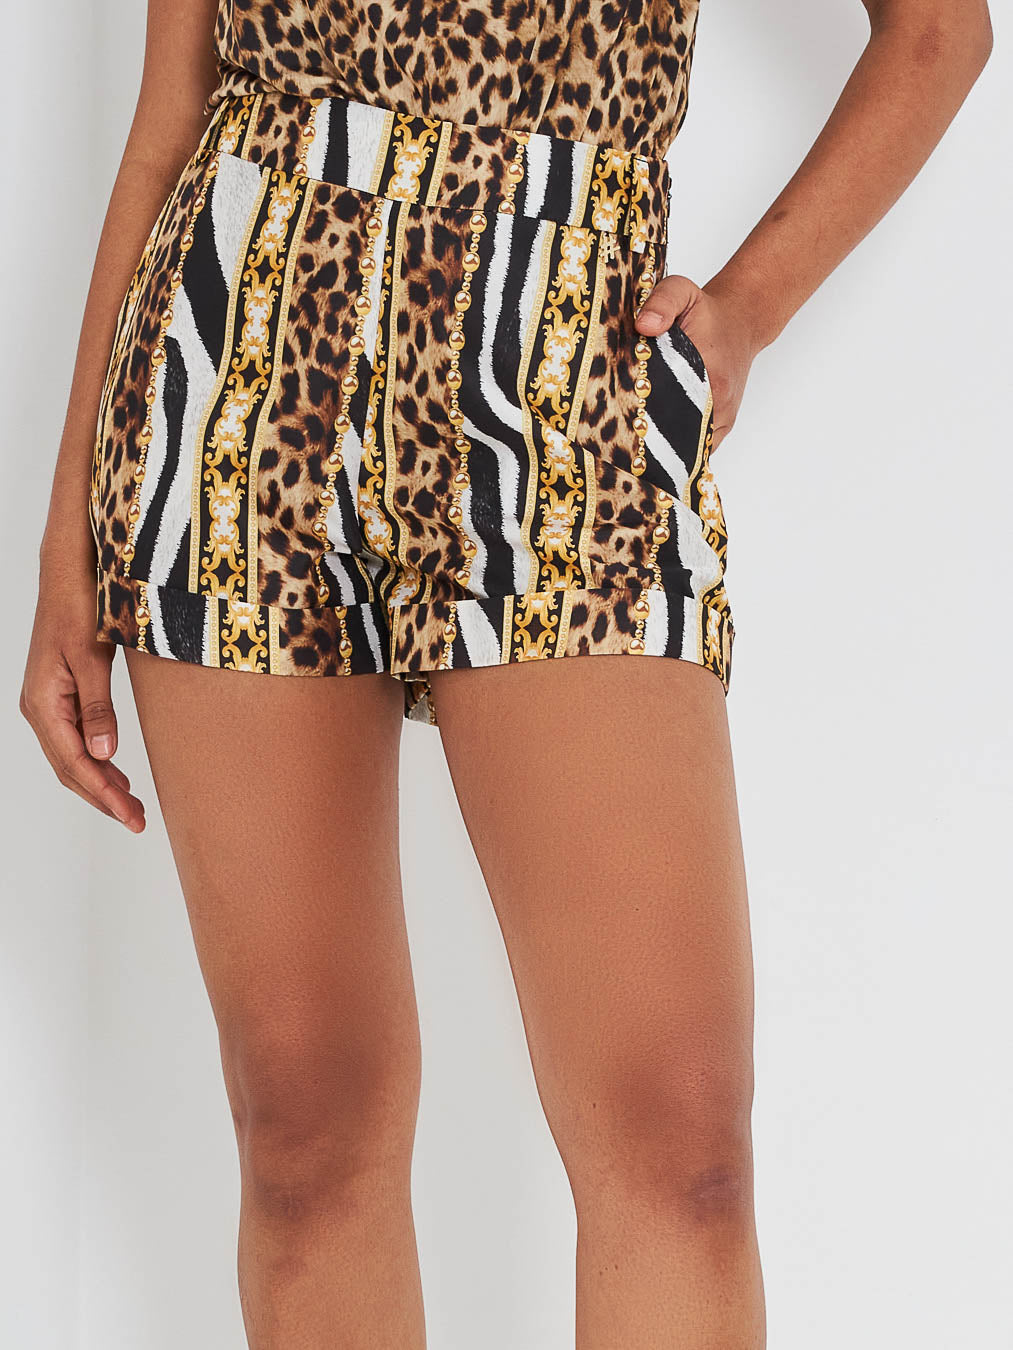 S#it patterned shorts